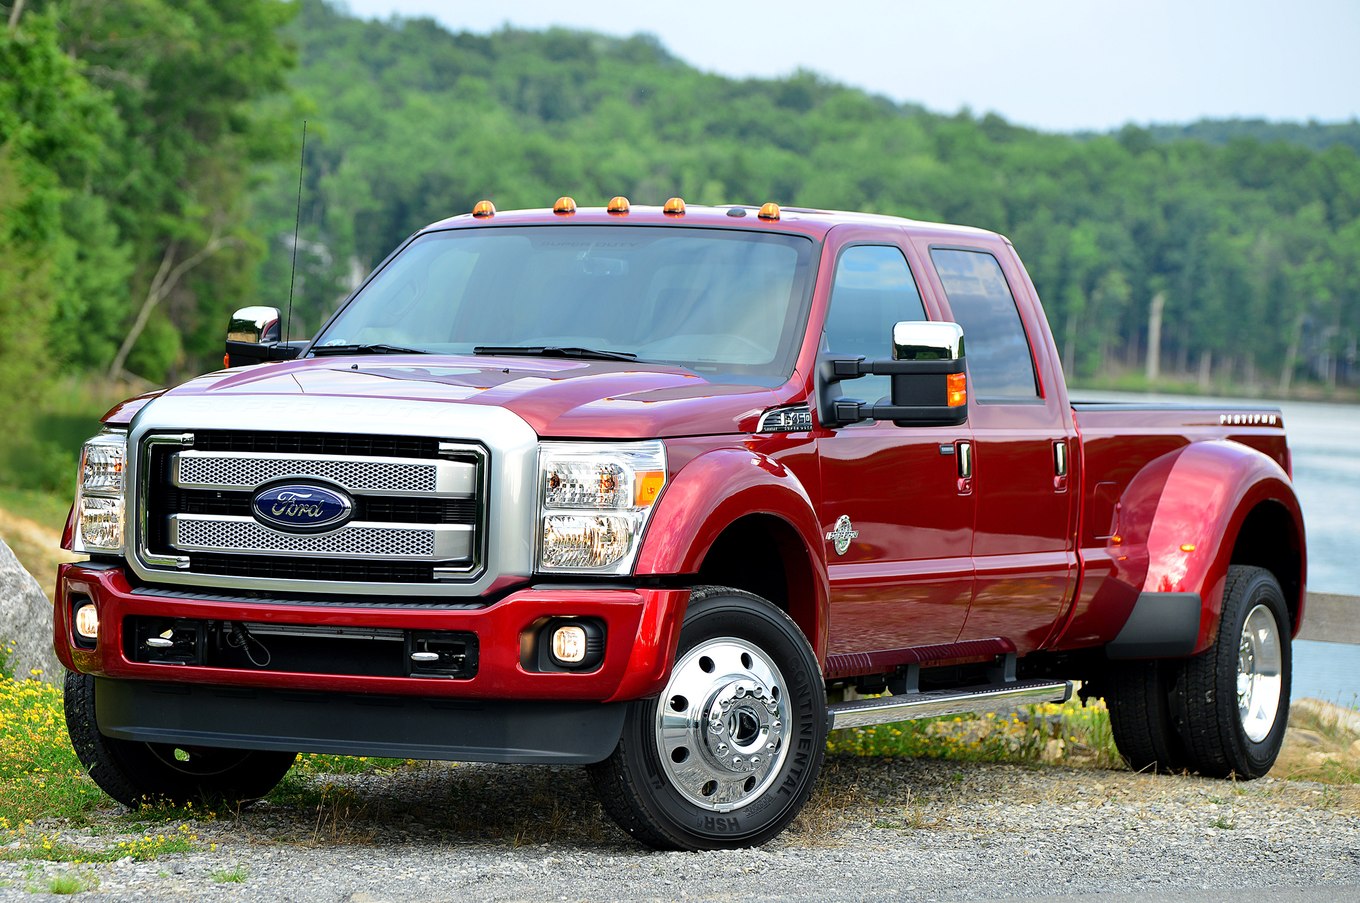 FORD Truck-F450 not Super Duty Used Engines